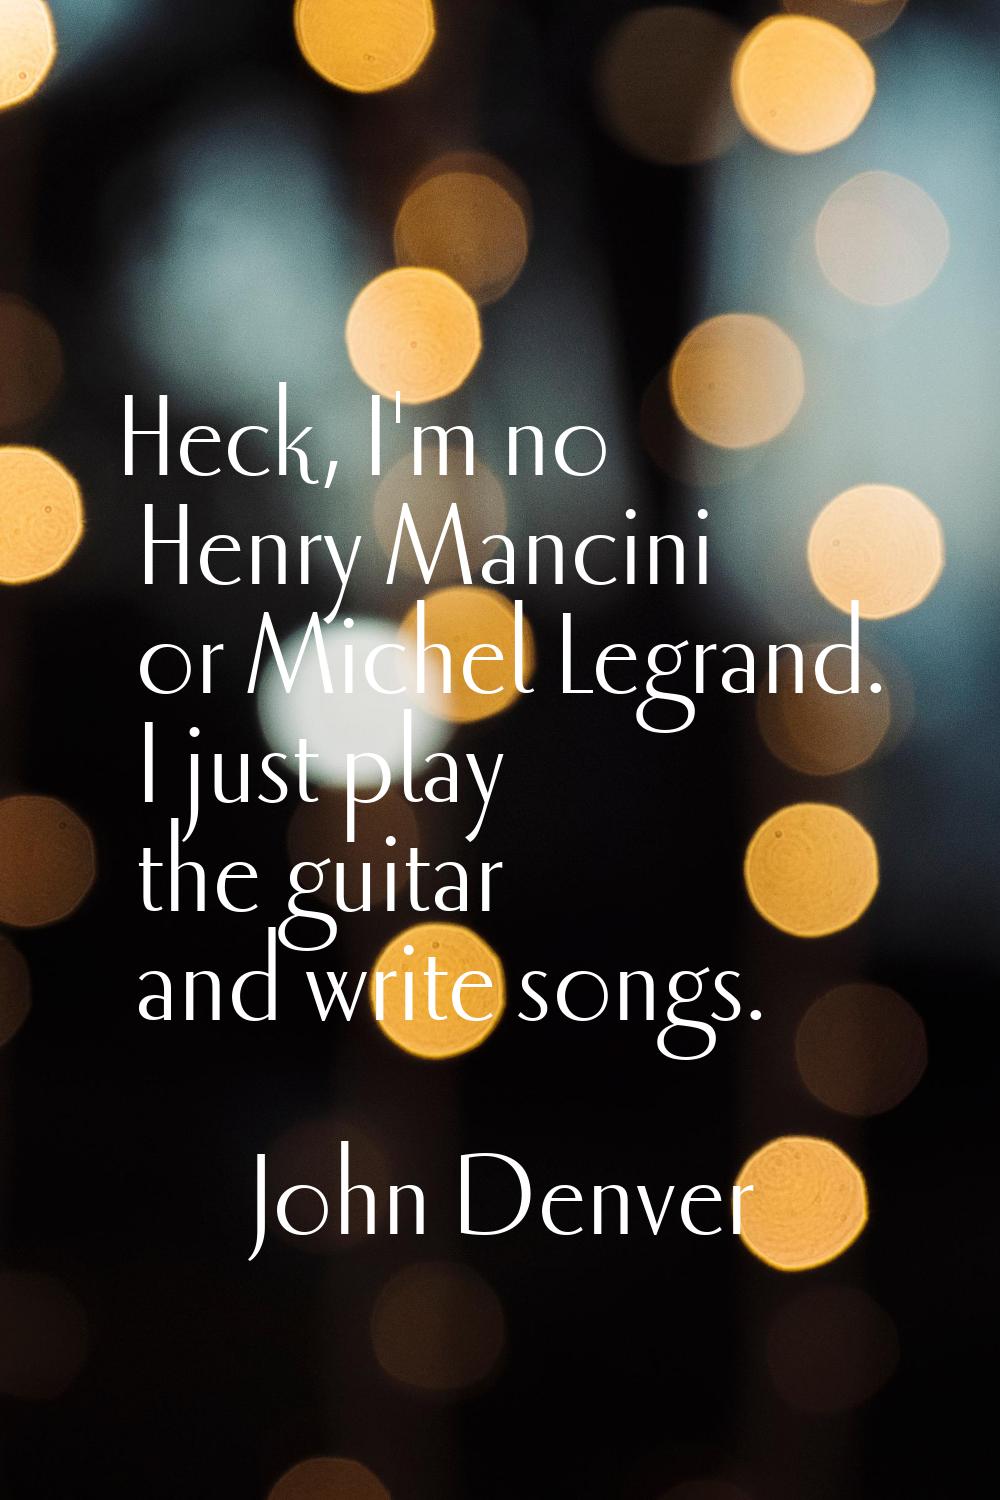 Heck, I'm no Henry Mancini or Michel Legrand. I just play the guitar and write songs.